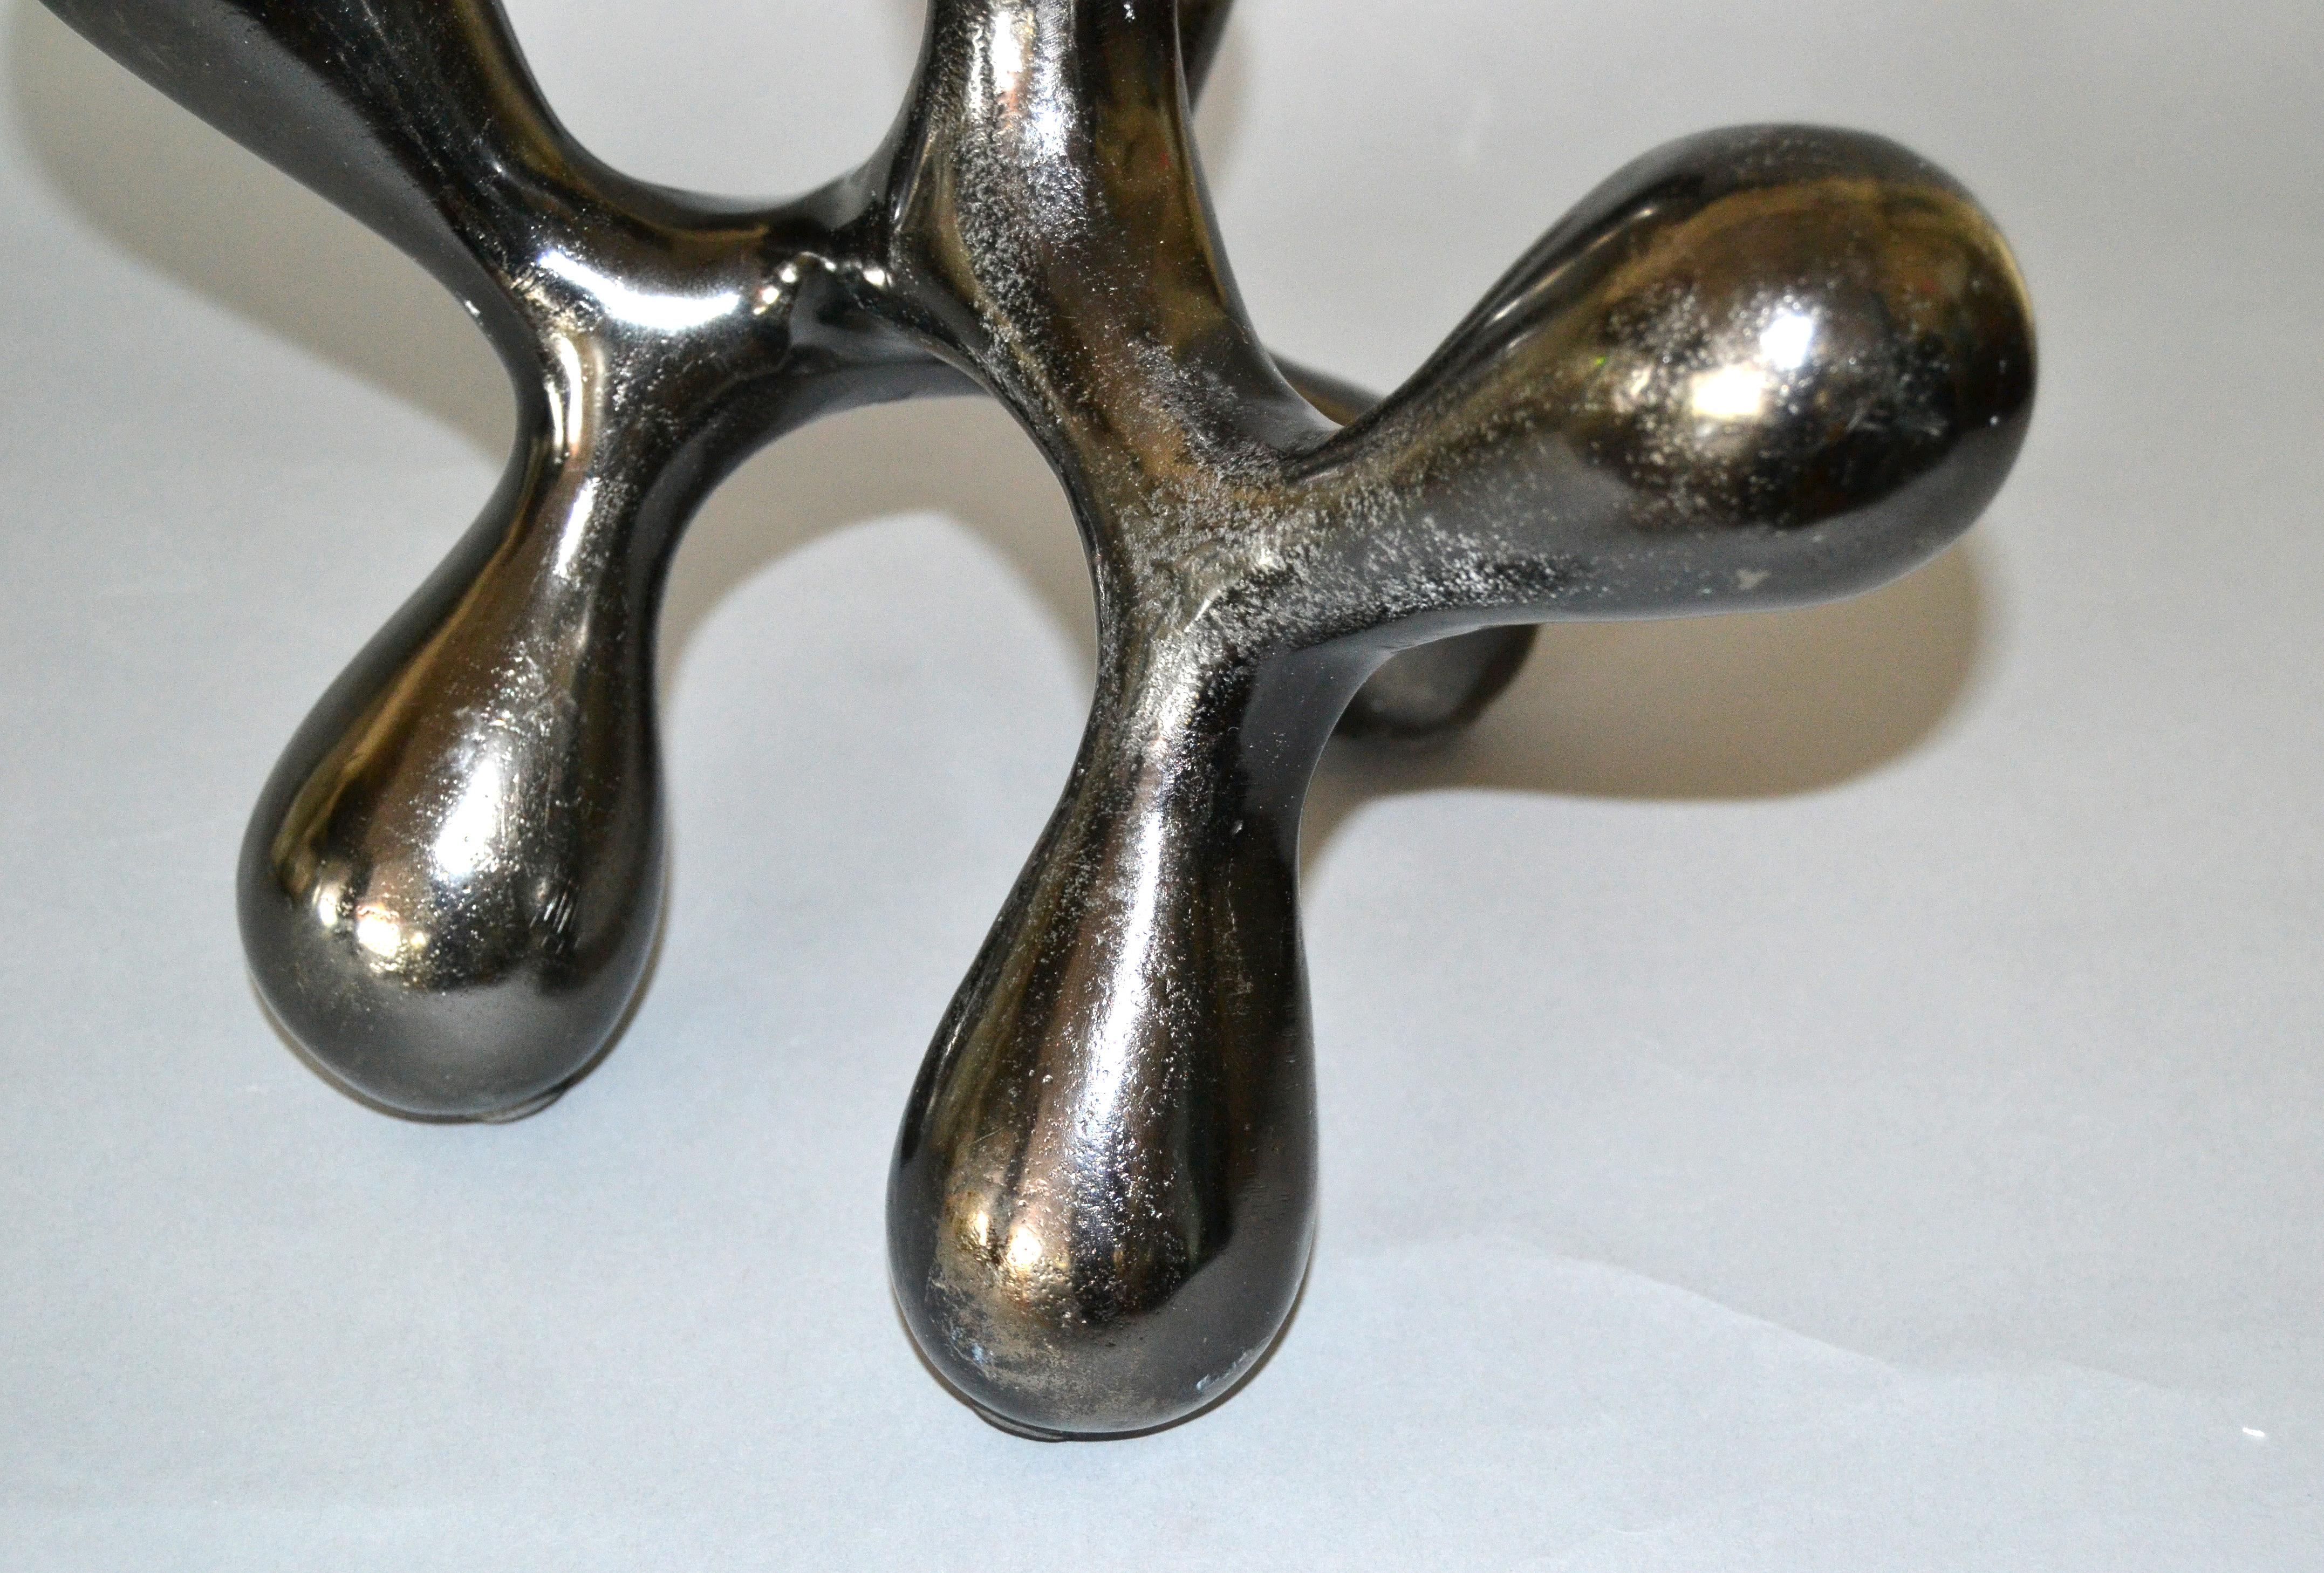 Biomorphic Shape in Abstract Art Bronze Table Sculpture 2